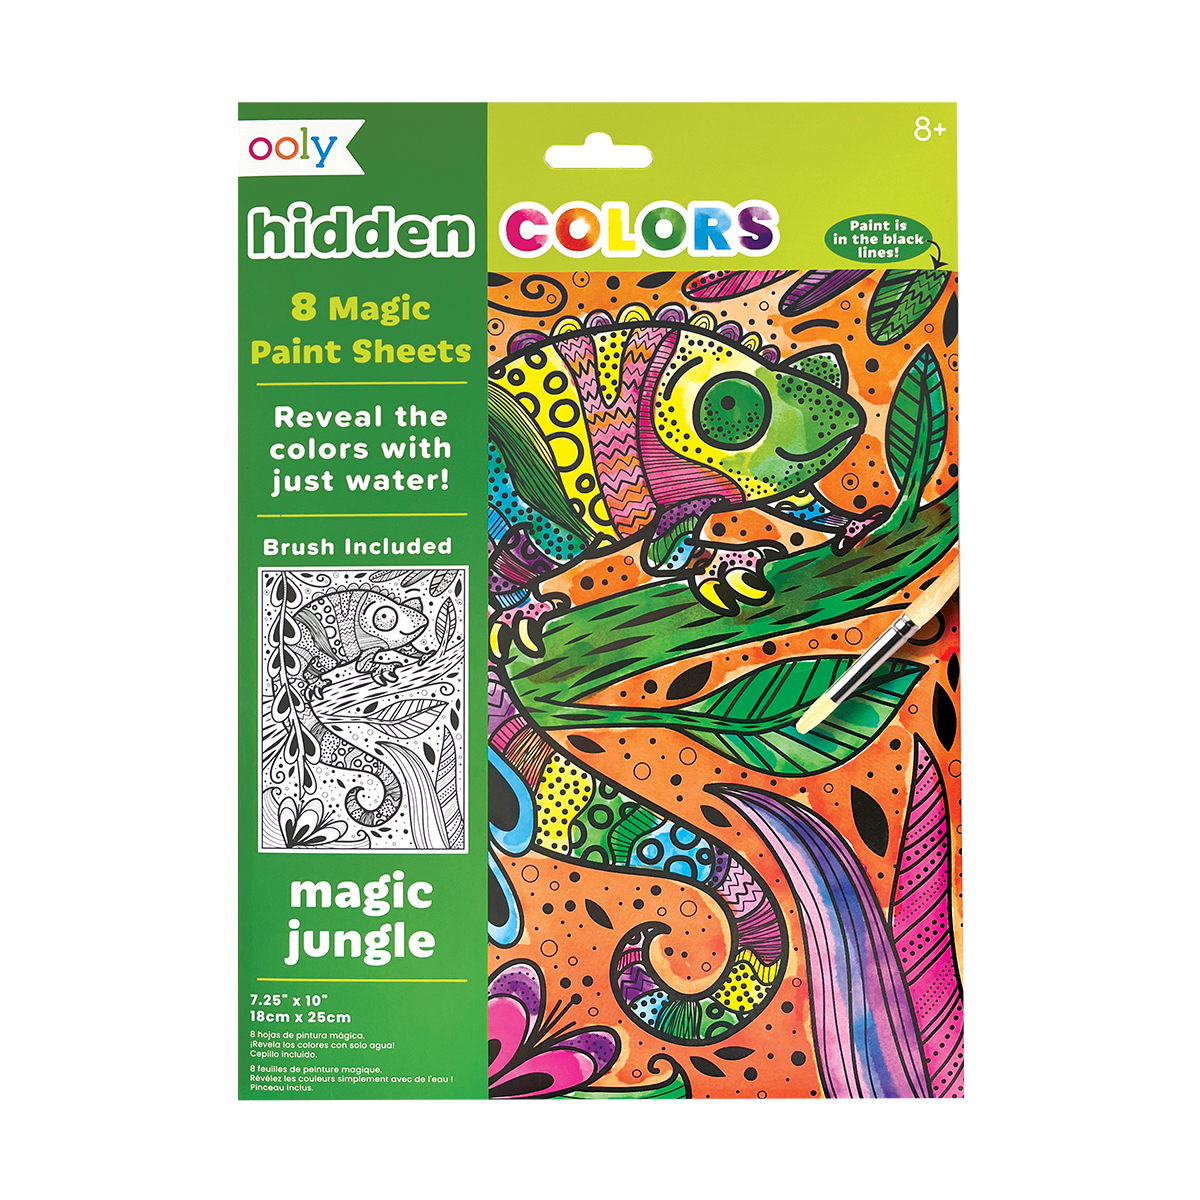 OOLY Hidden Colors Magic Paint Sheets - Magic Jungle in packaging